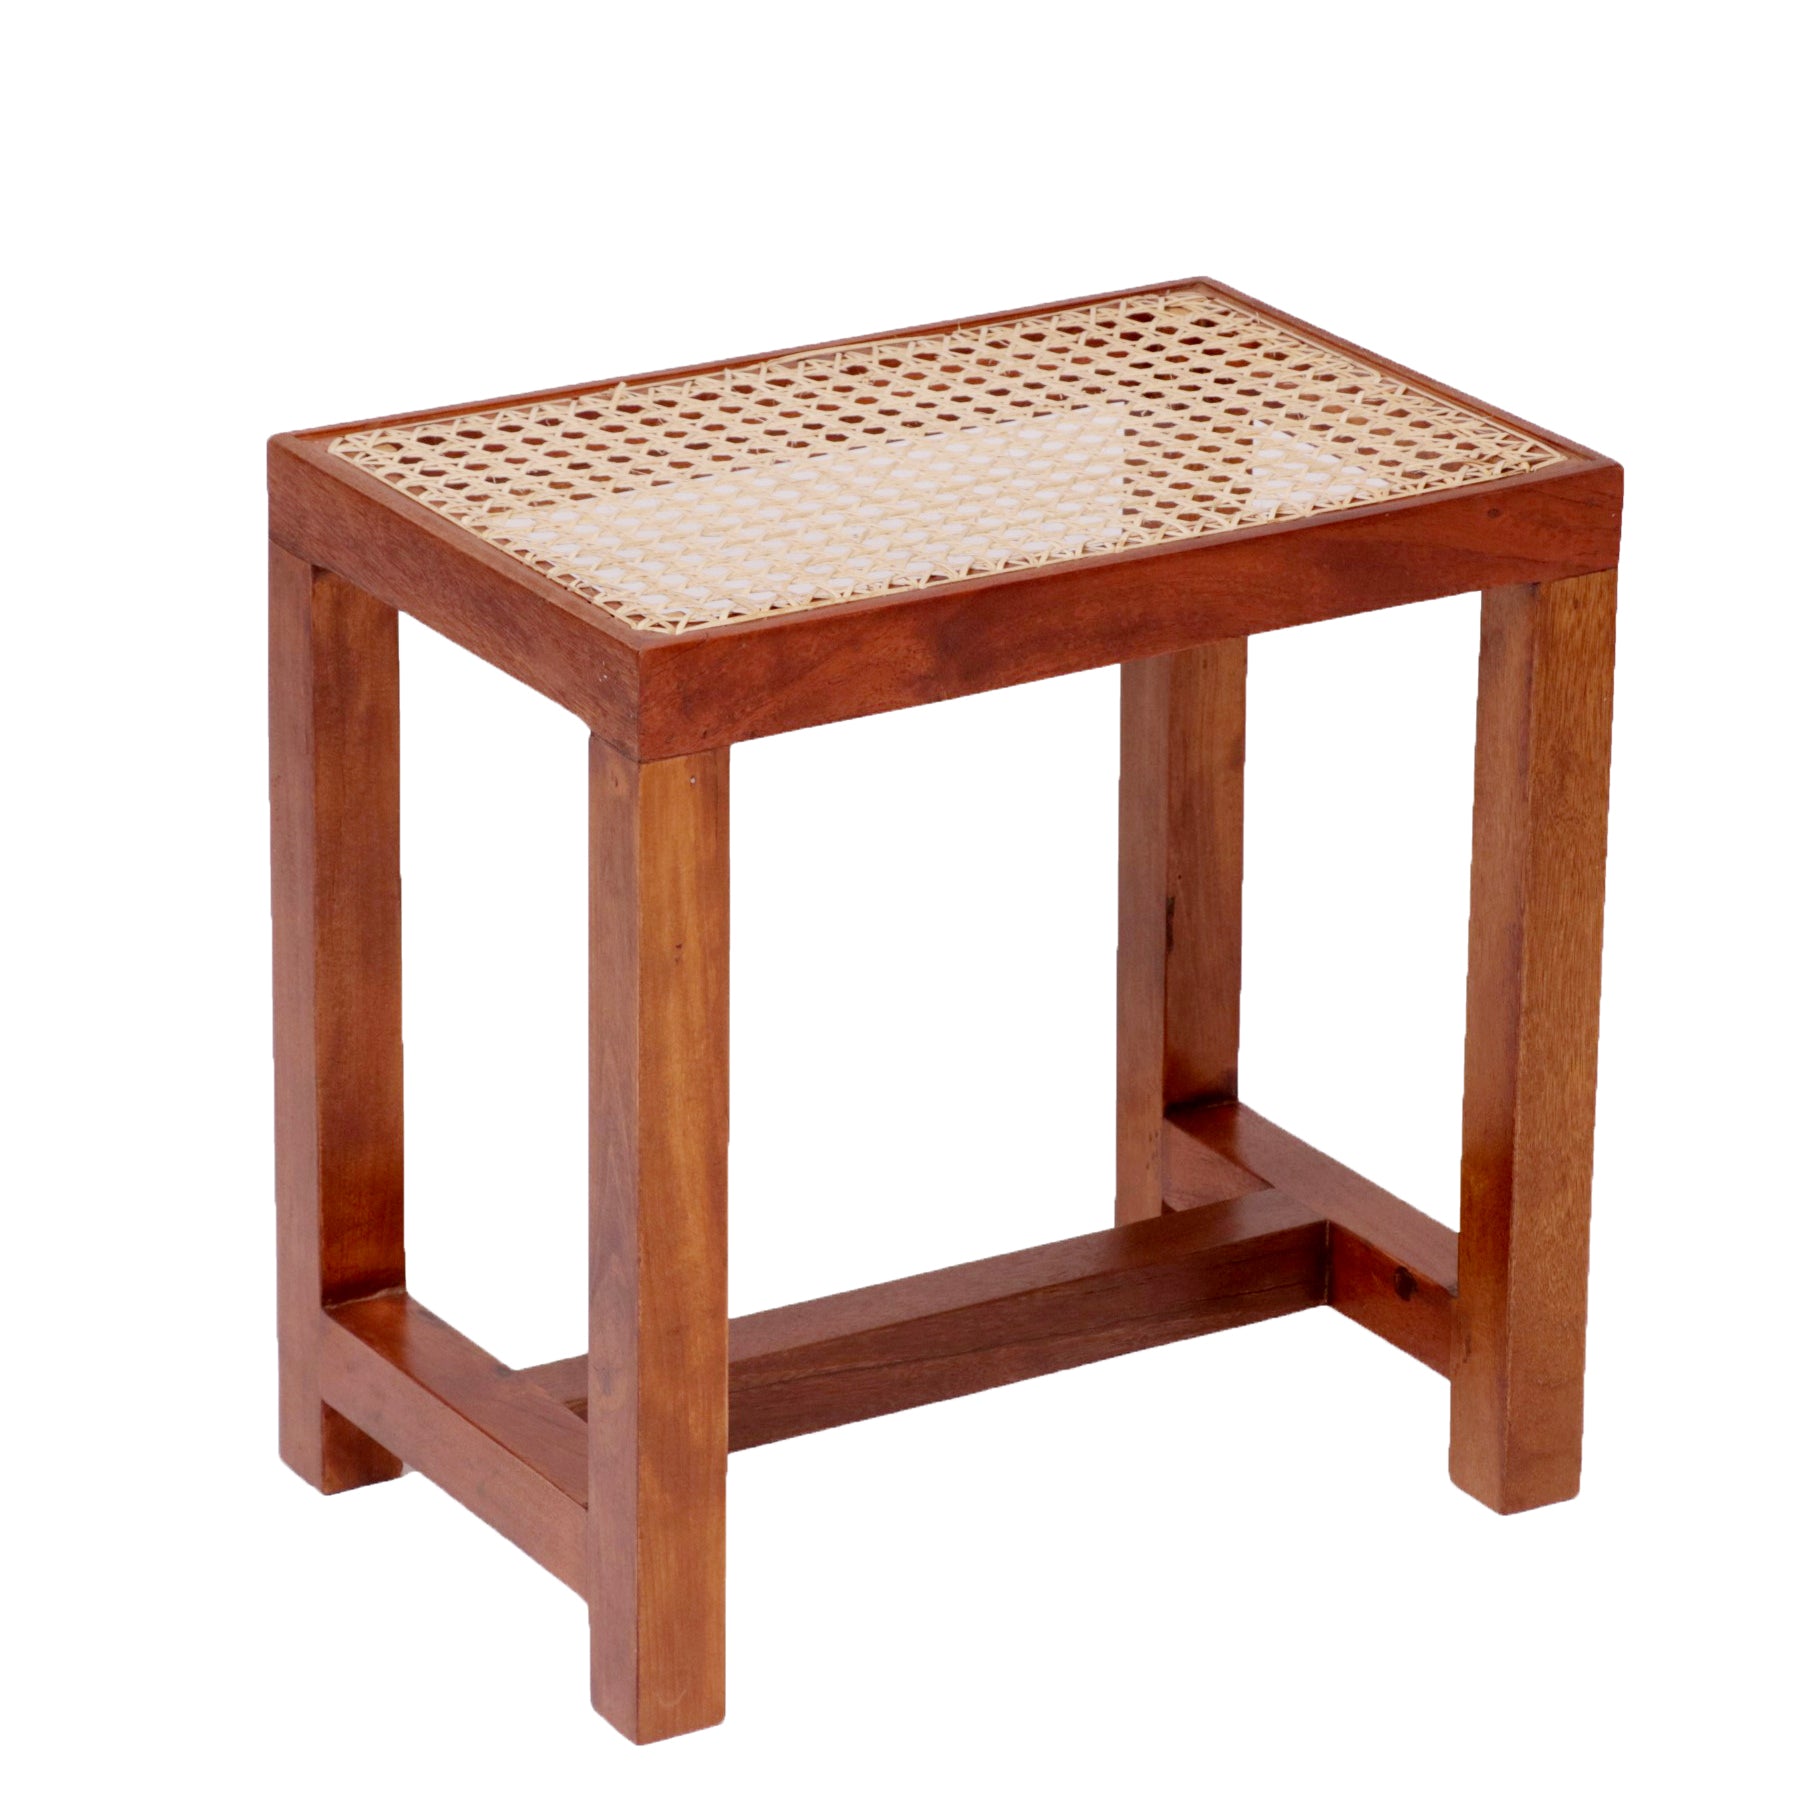 Seating Height Cane Stool Stool